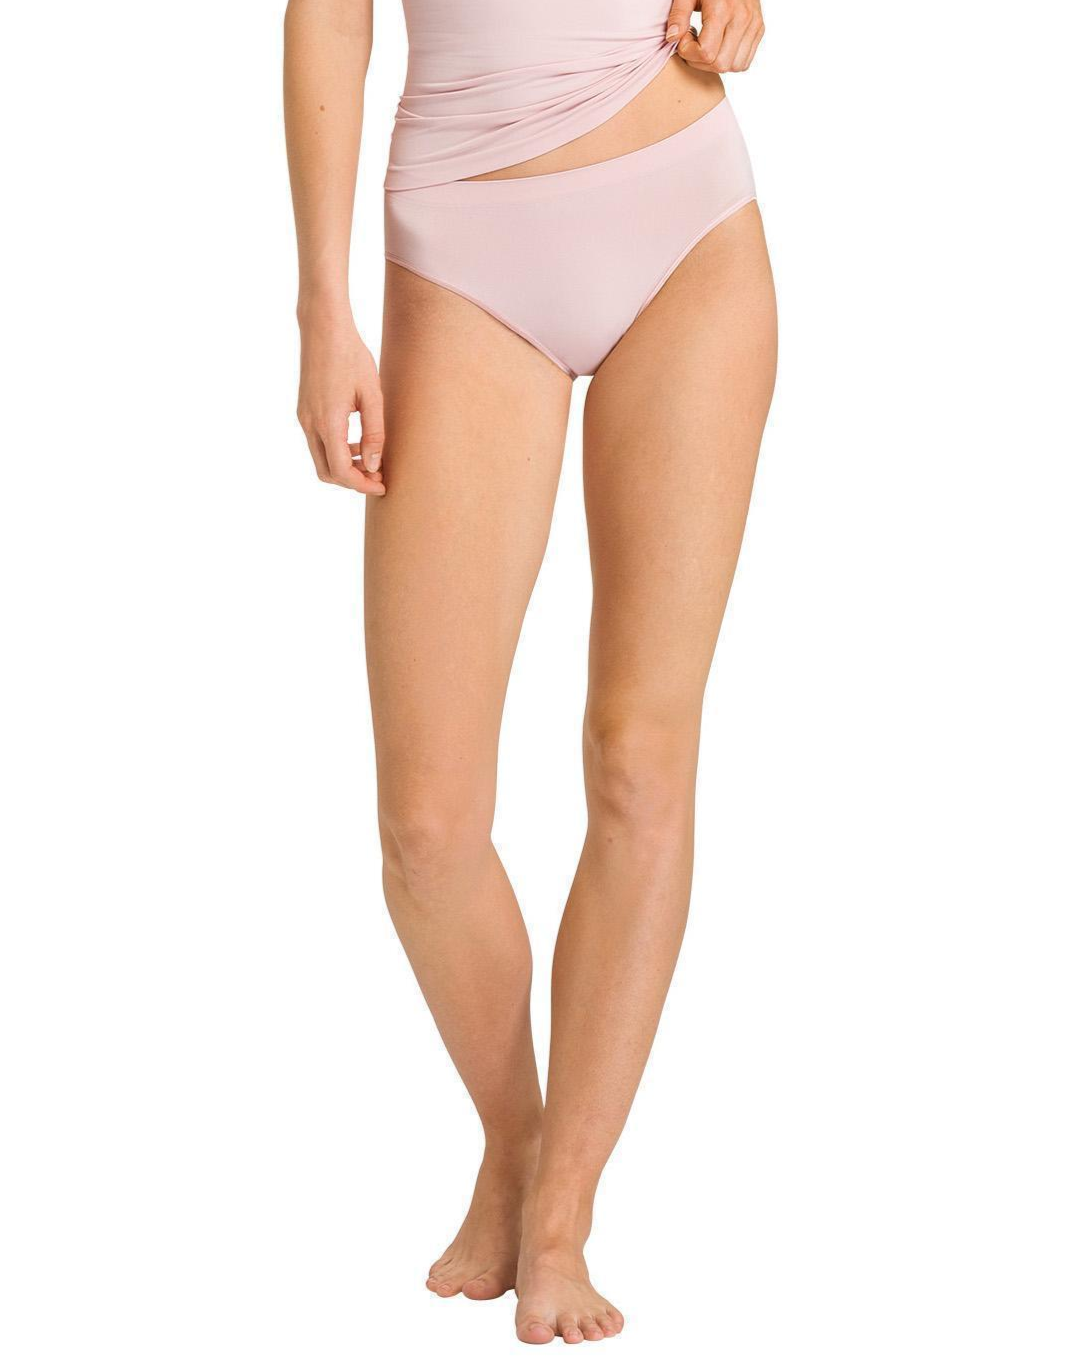 Touch Feeling Midi Brief- Lotus: Size M